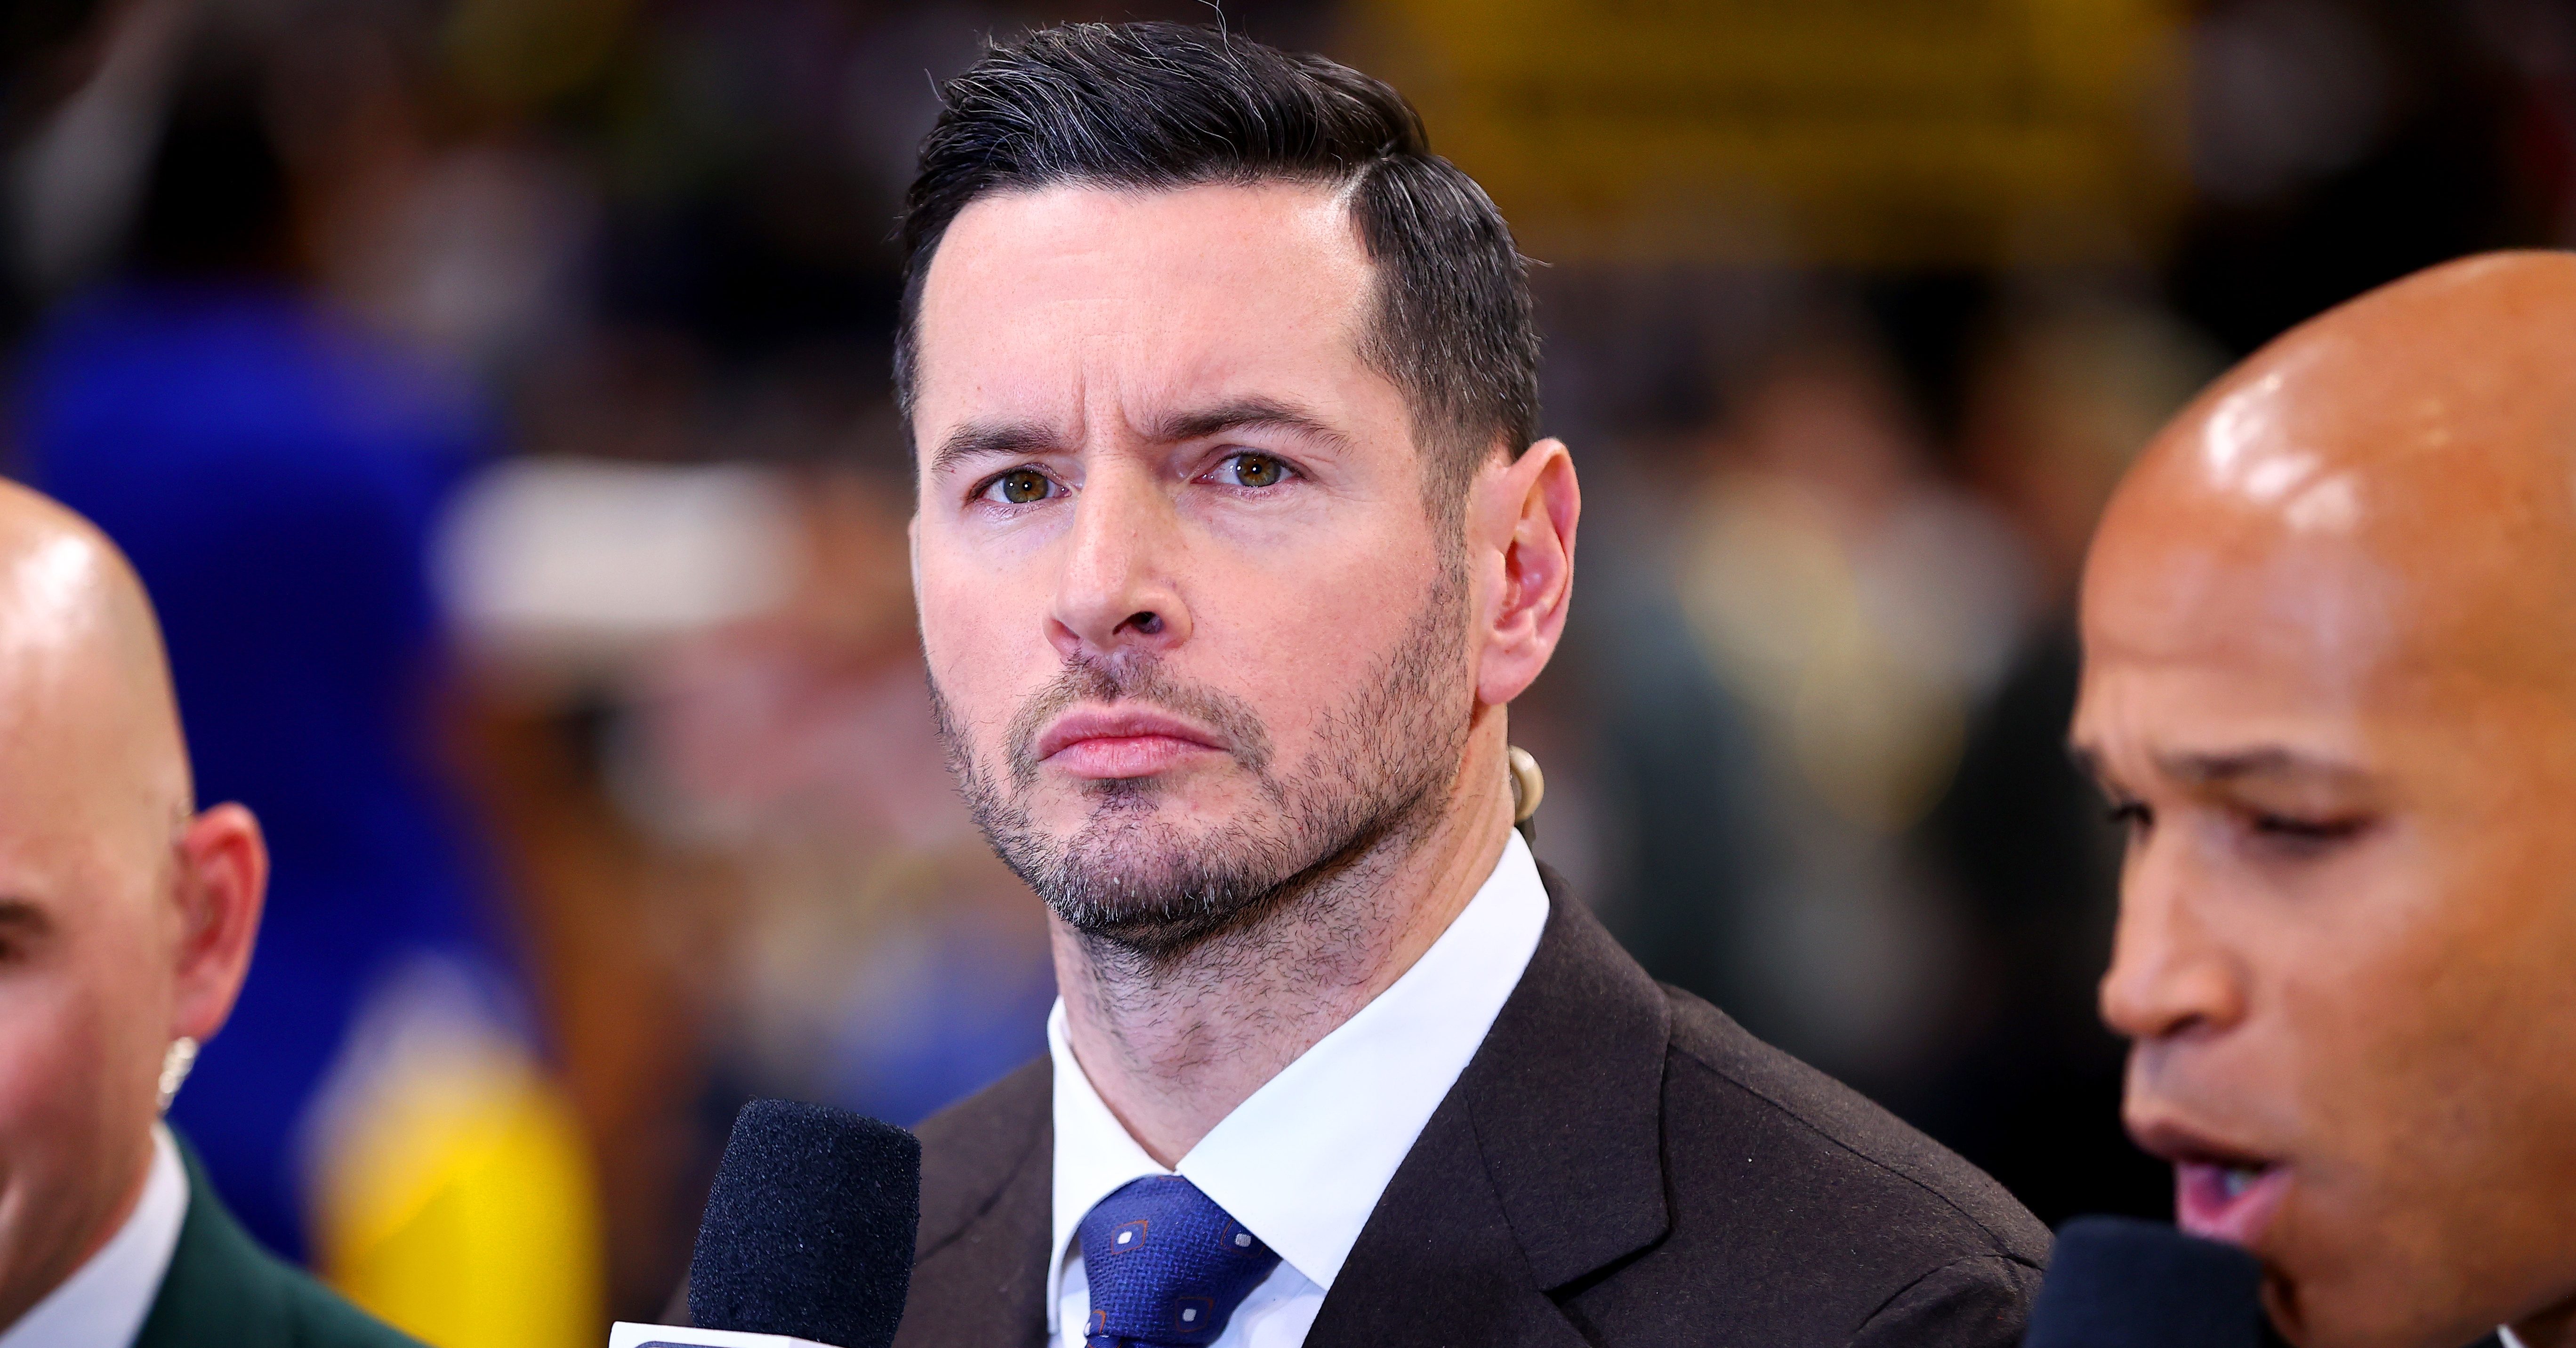 Hornets to interview JJ Redick for head-coaching vacancy: Report